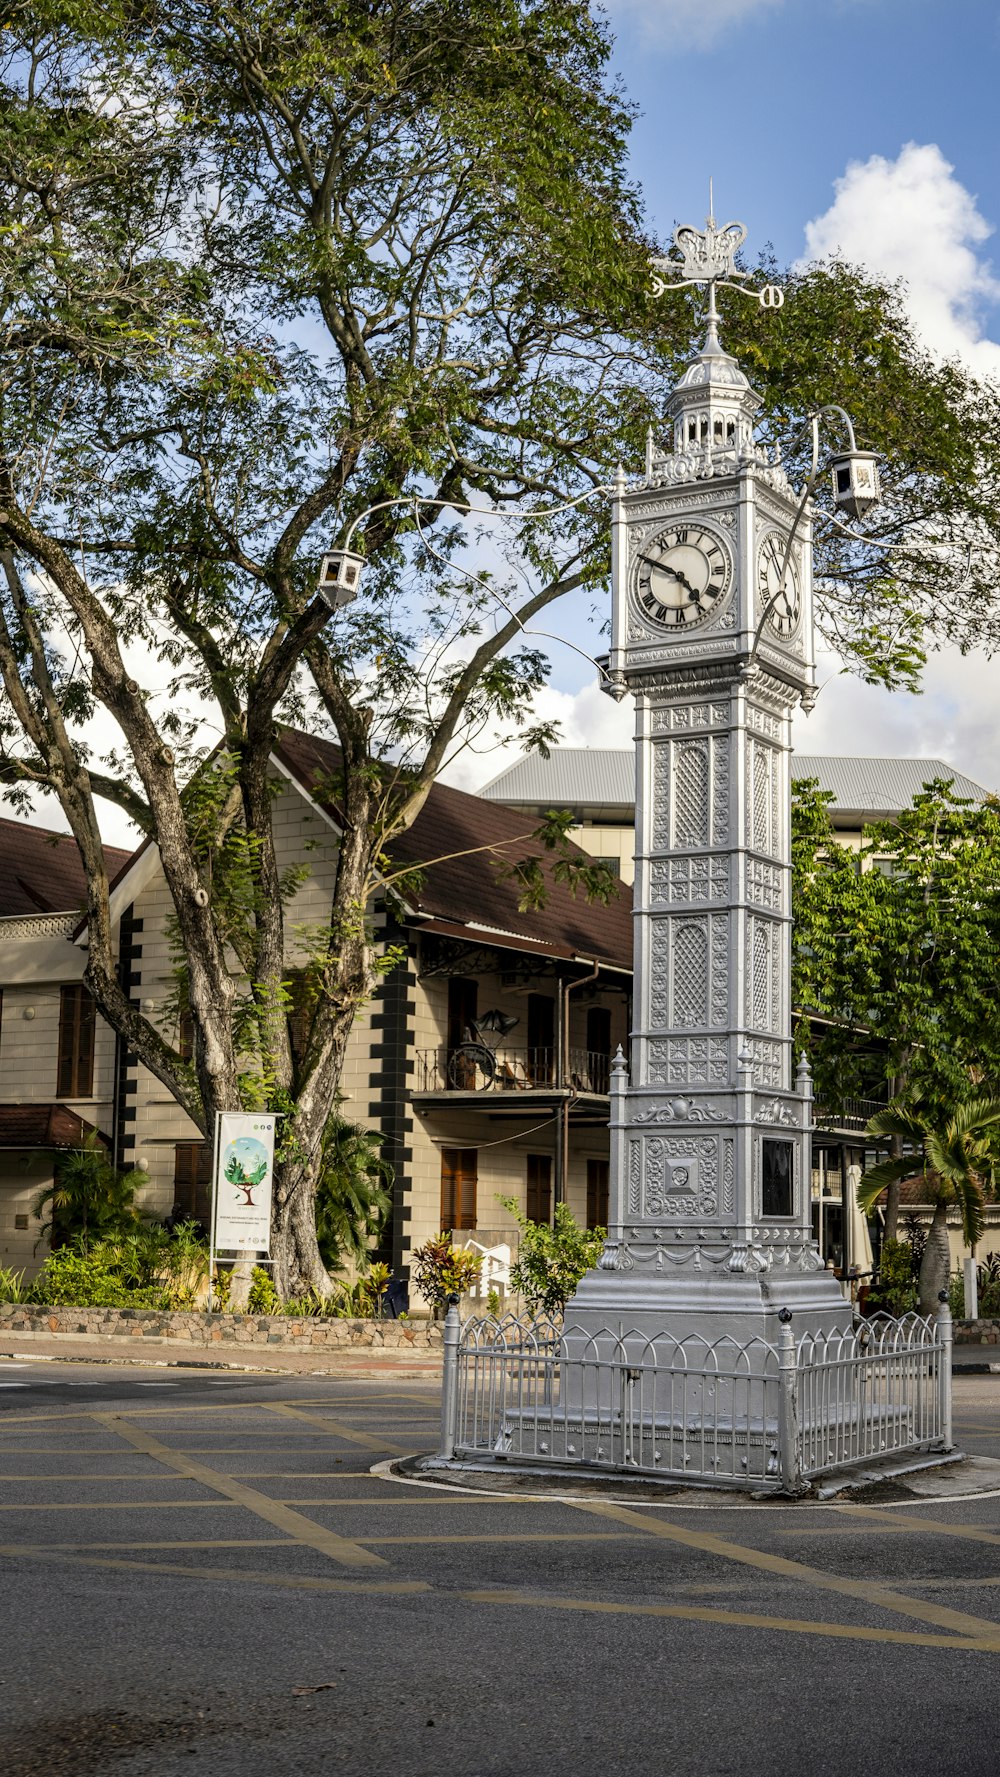 a tall clock tower sitting on the side of a road